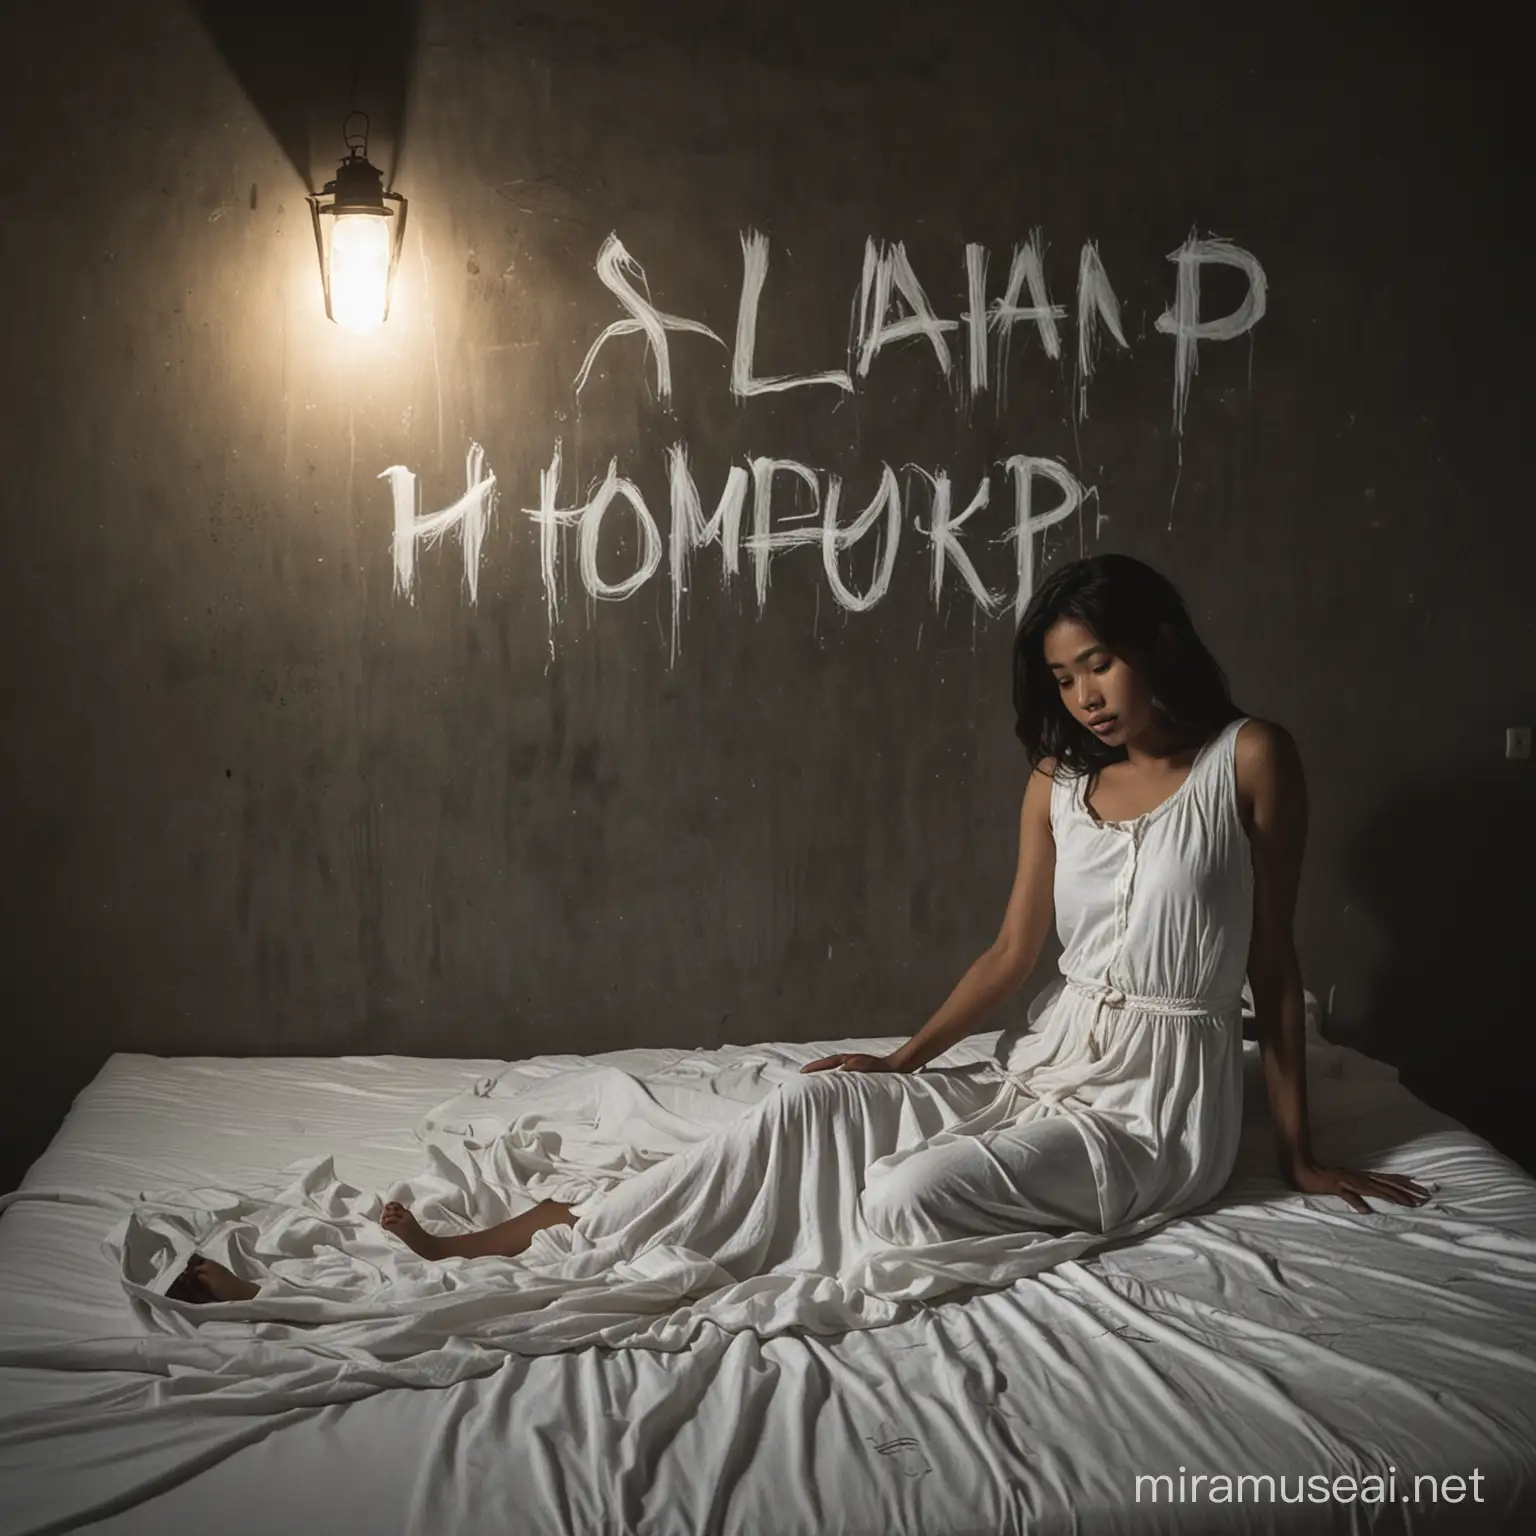 a 20 year old Indonesian man, thin body wearing modern casual clothes, was sleeping on a mattress in a dark room, there was a lantern as his attacker, there was the writing "Slam kholop" on the wall of the room, accompanied by the ghost of a beautiful woman wearing a dirty white dress, real looking, professional photographer